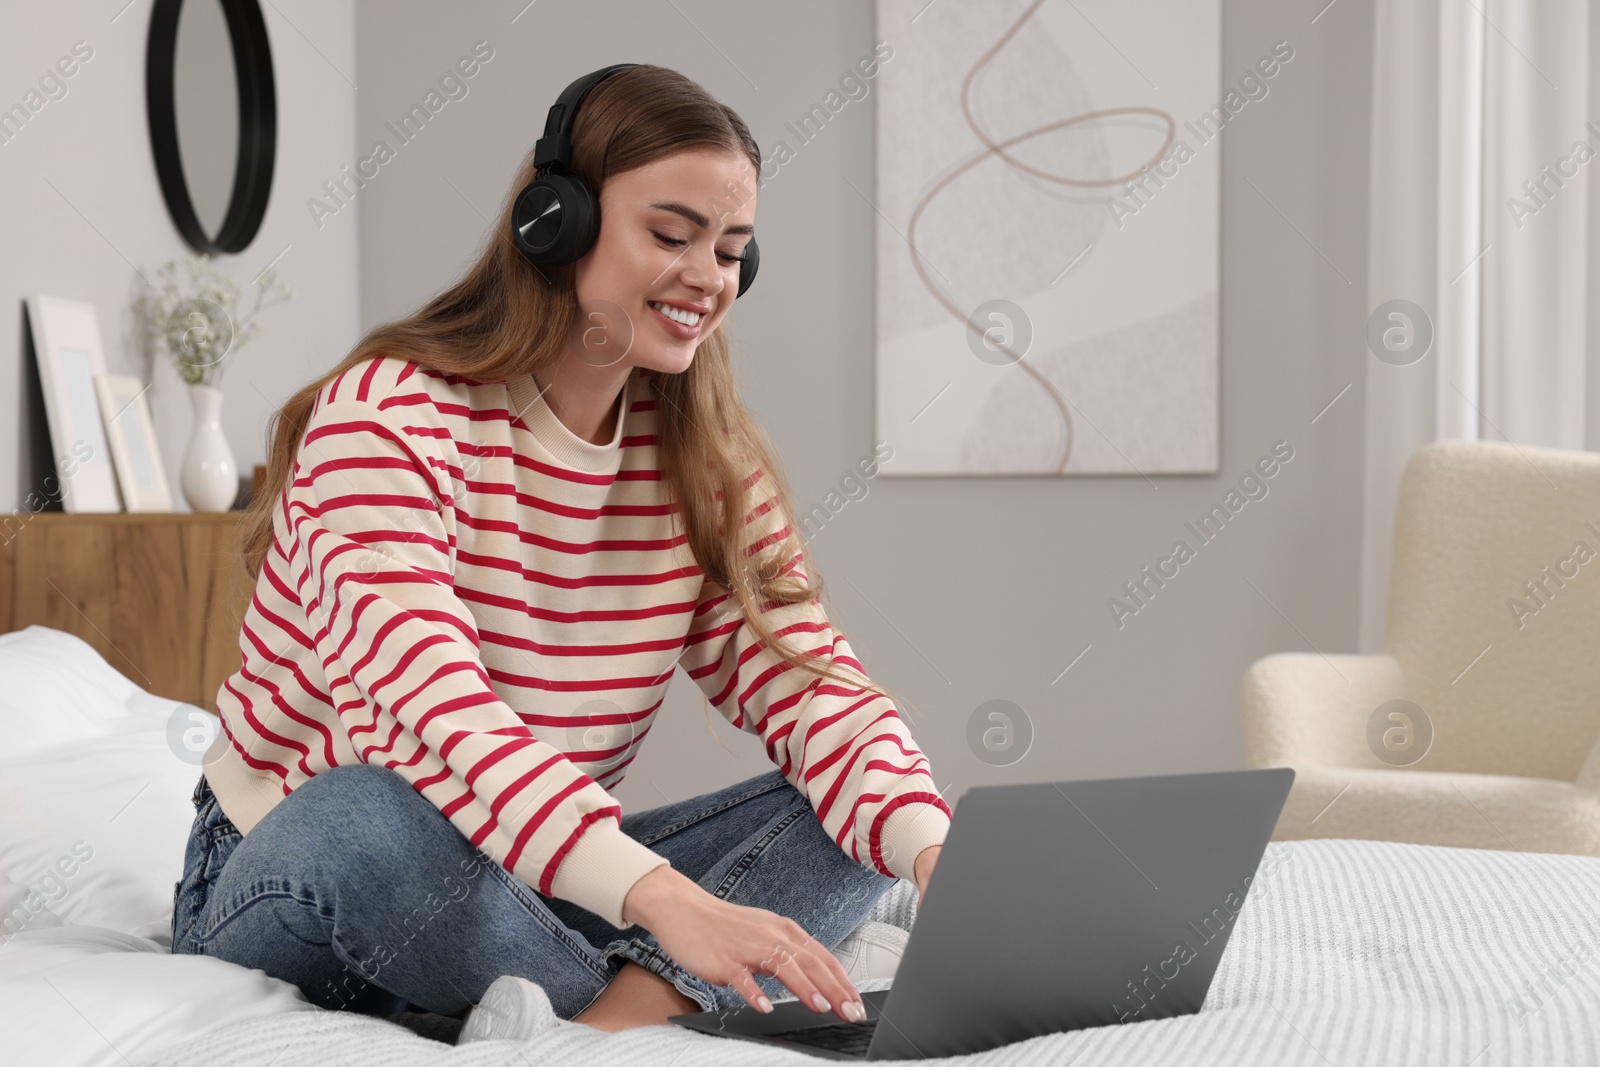 Photo of Happy woman with headphones and laptop on bed in bedroom